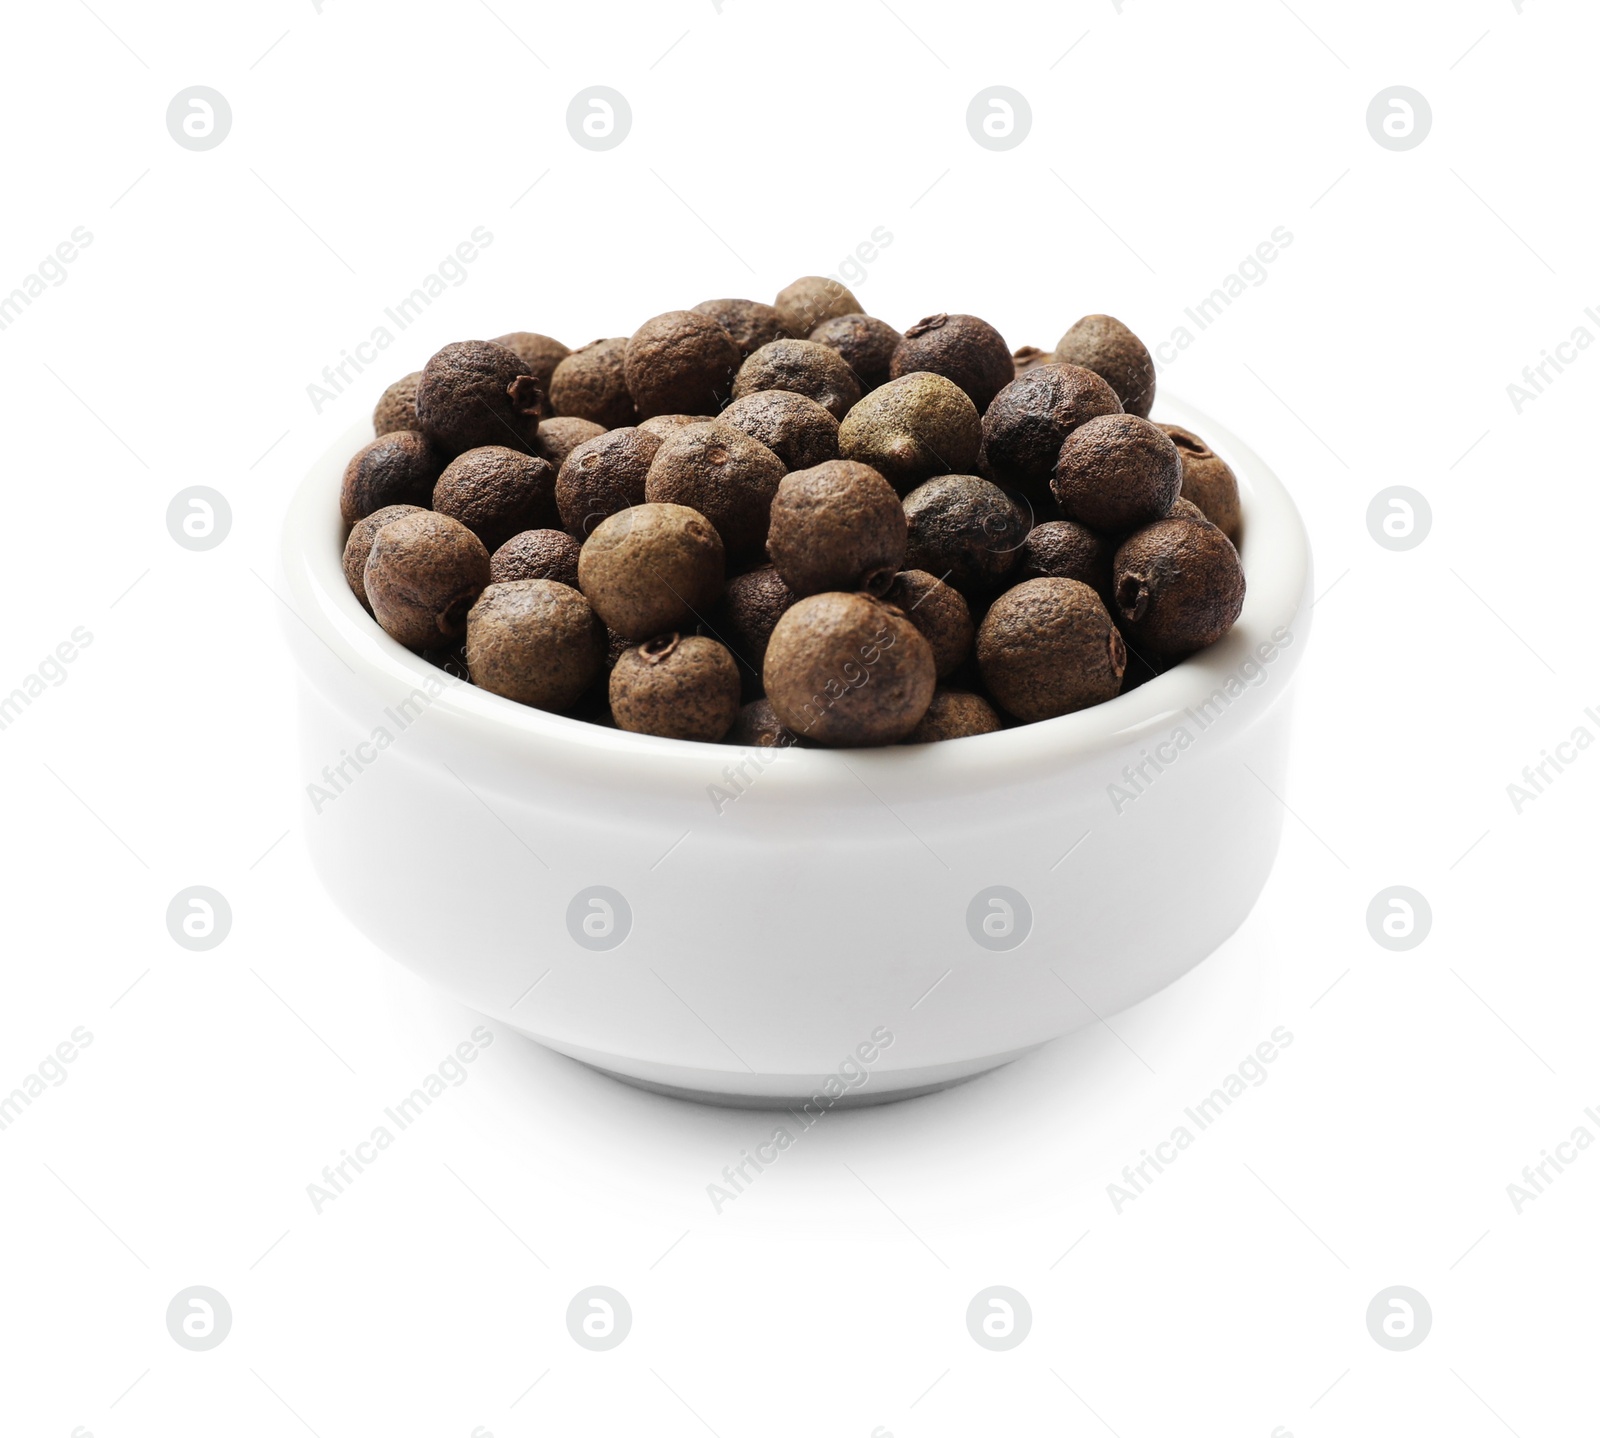 Photo of Dry allspice berries (Jamaica pepper) in bowl isolated on white